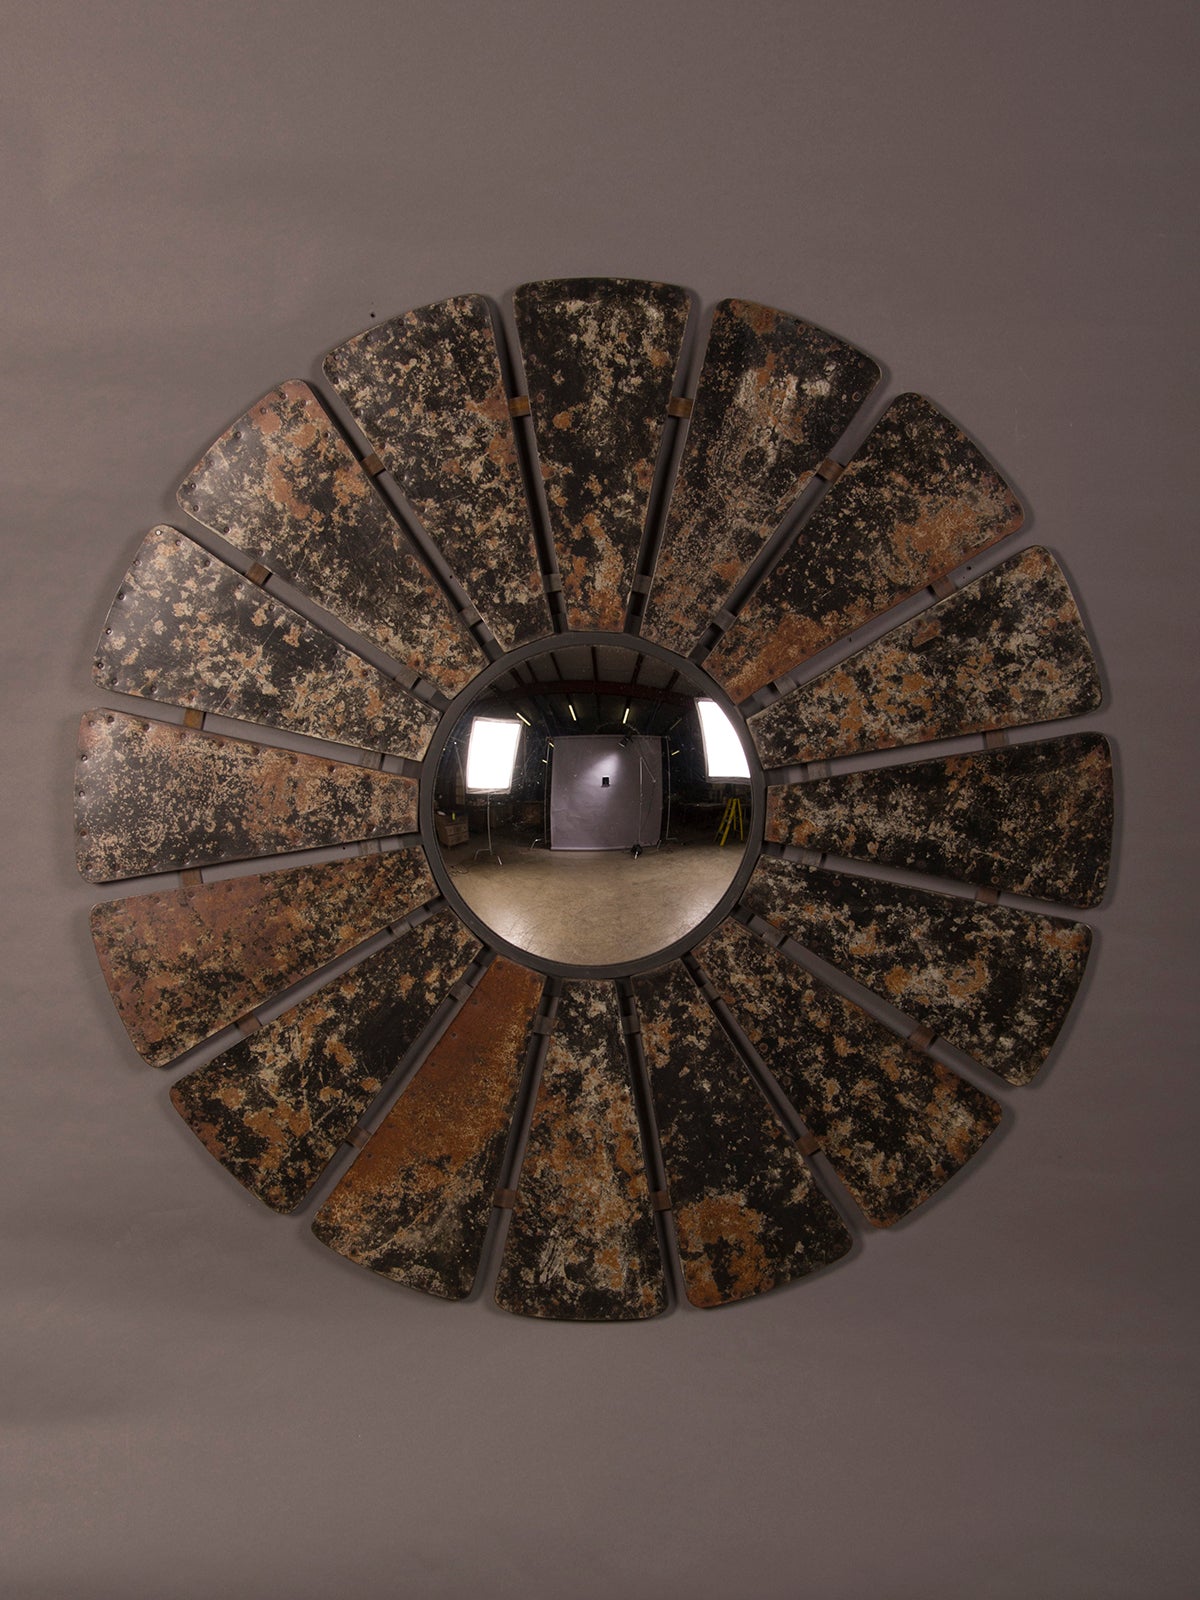 Enormous Frame of Patinated Zinc Petals and a Convex Mirror from France